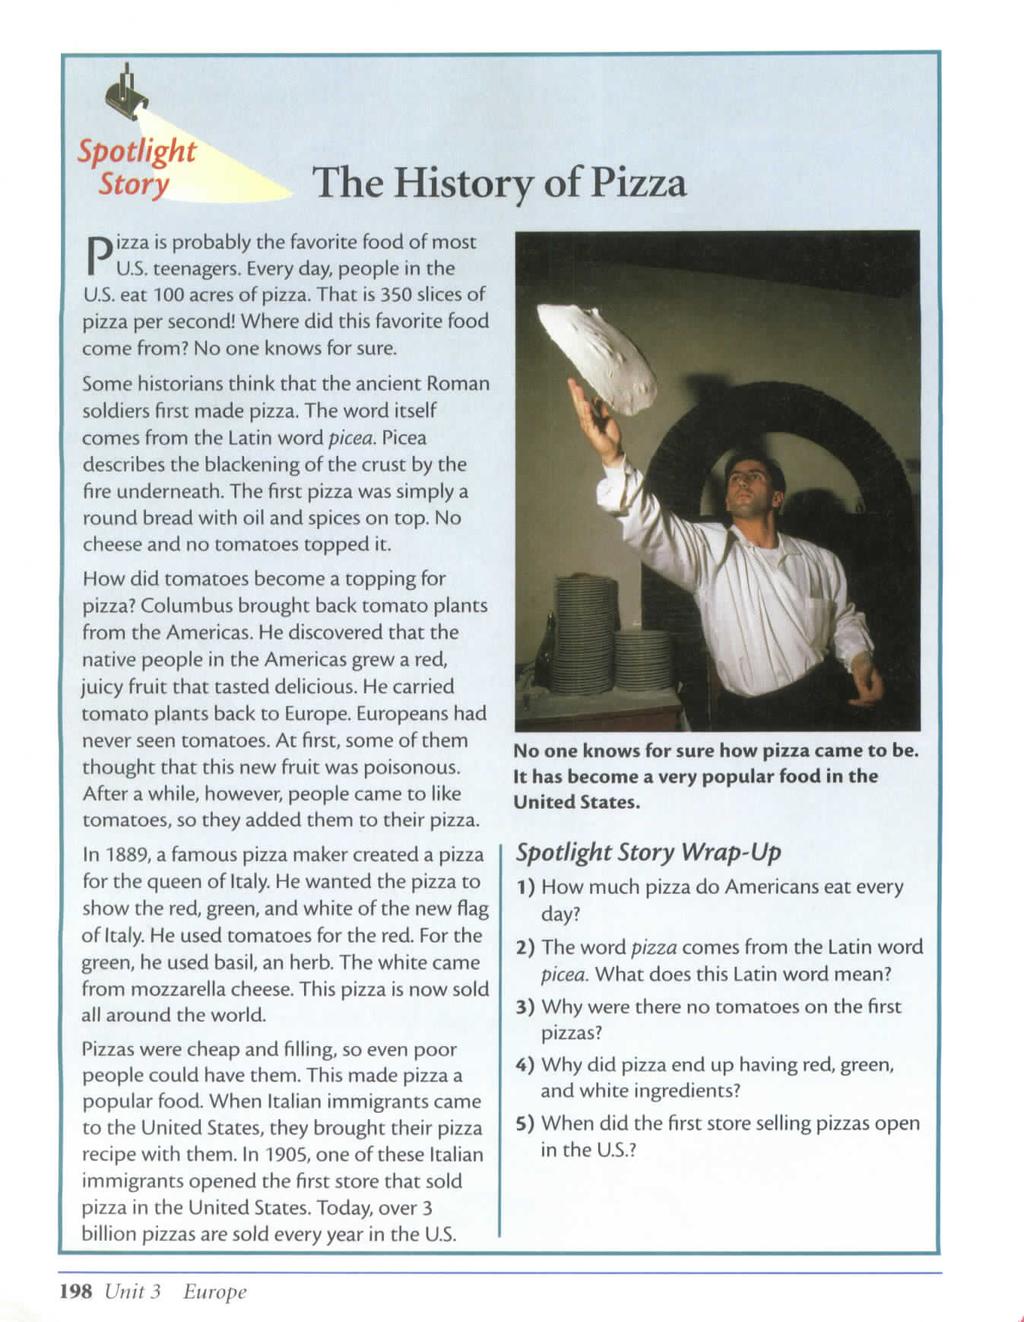 Spotlight Story Pizza is probably the favorite food of most U.S. teenagers. Every day, people in the U.S. eat 100 acres of pizza. That is 350 slices of pizza per second!